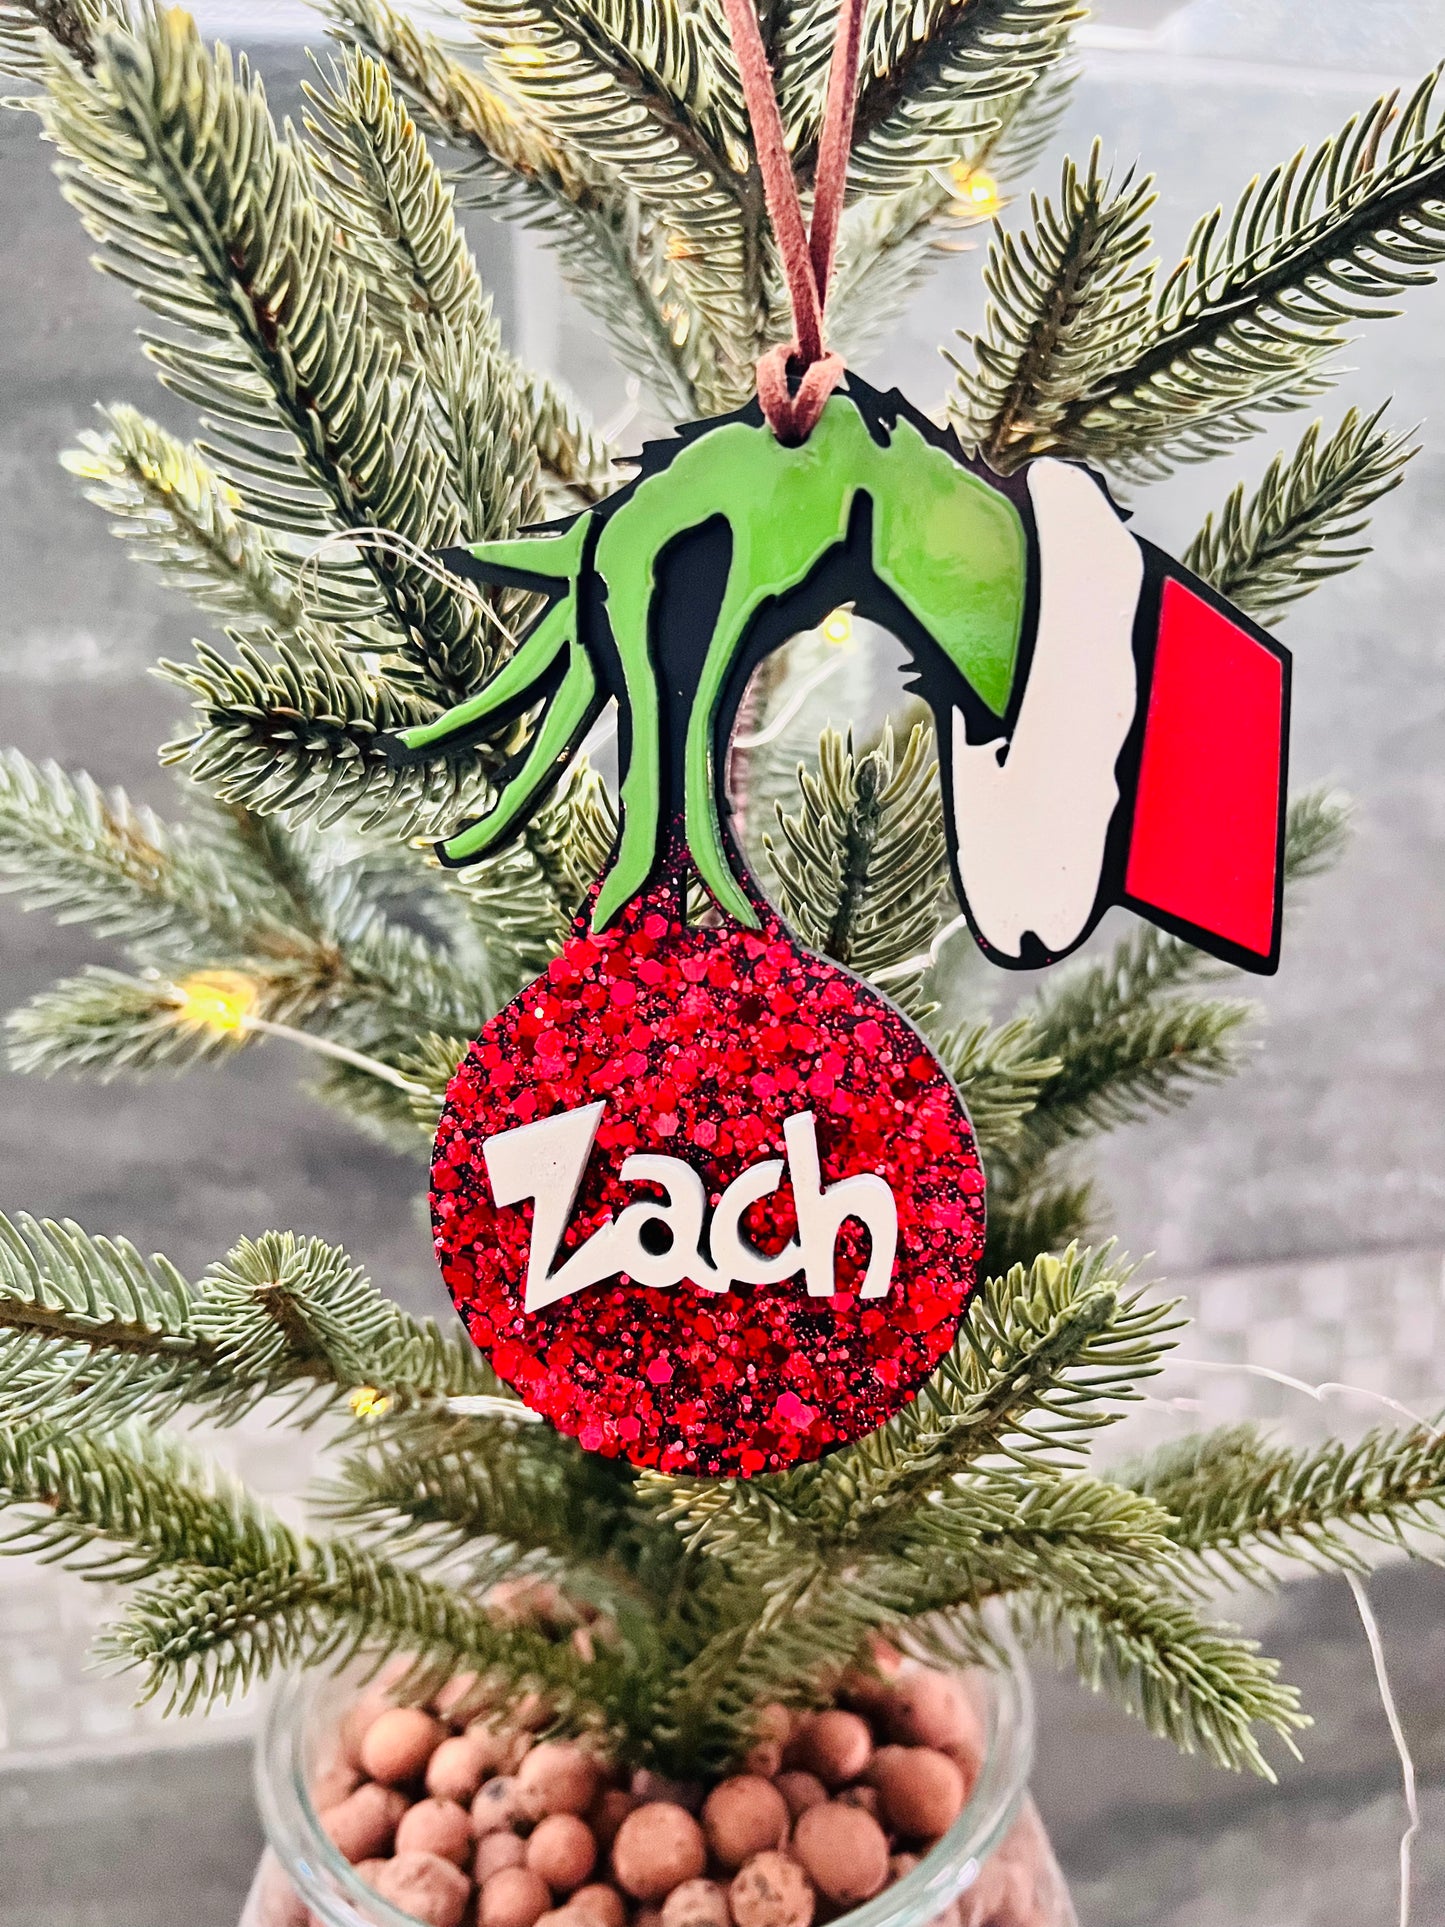 Grinch Inspired Ornaments